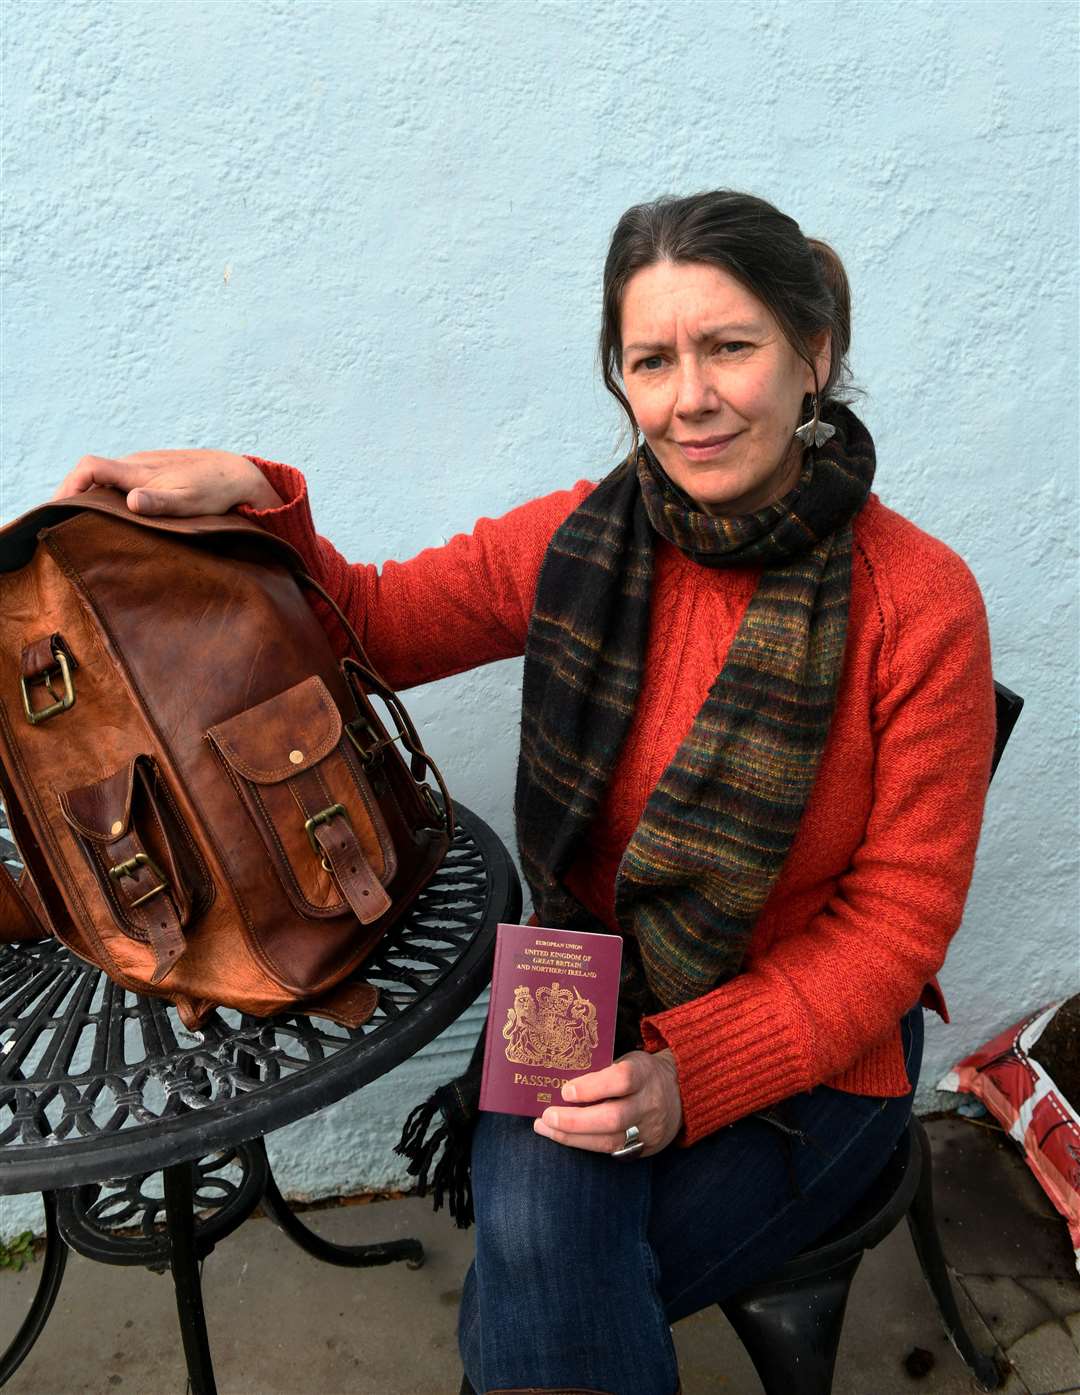 Emma Thomas, of Nairn, is heading to Poland to see if she can help Ukrainian refugees.